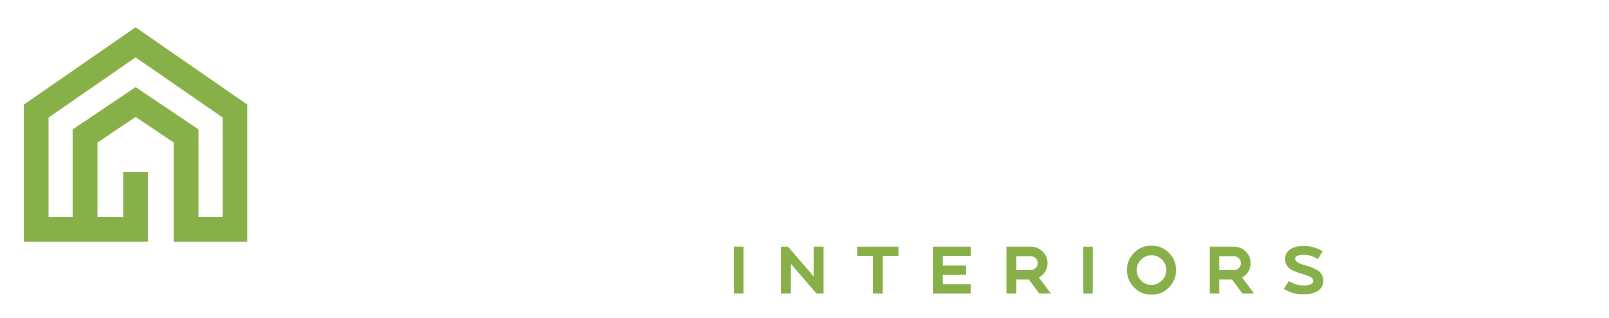 doing whats right interior logo